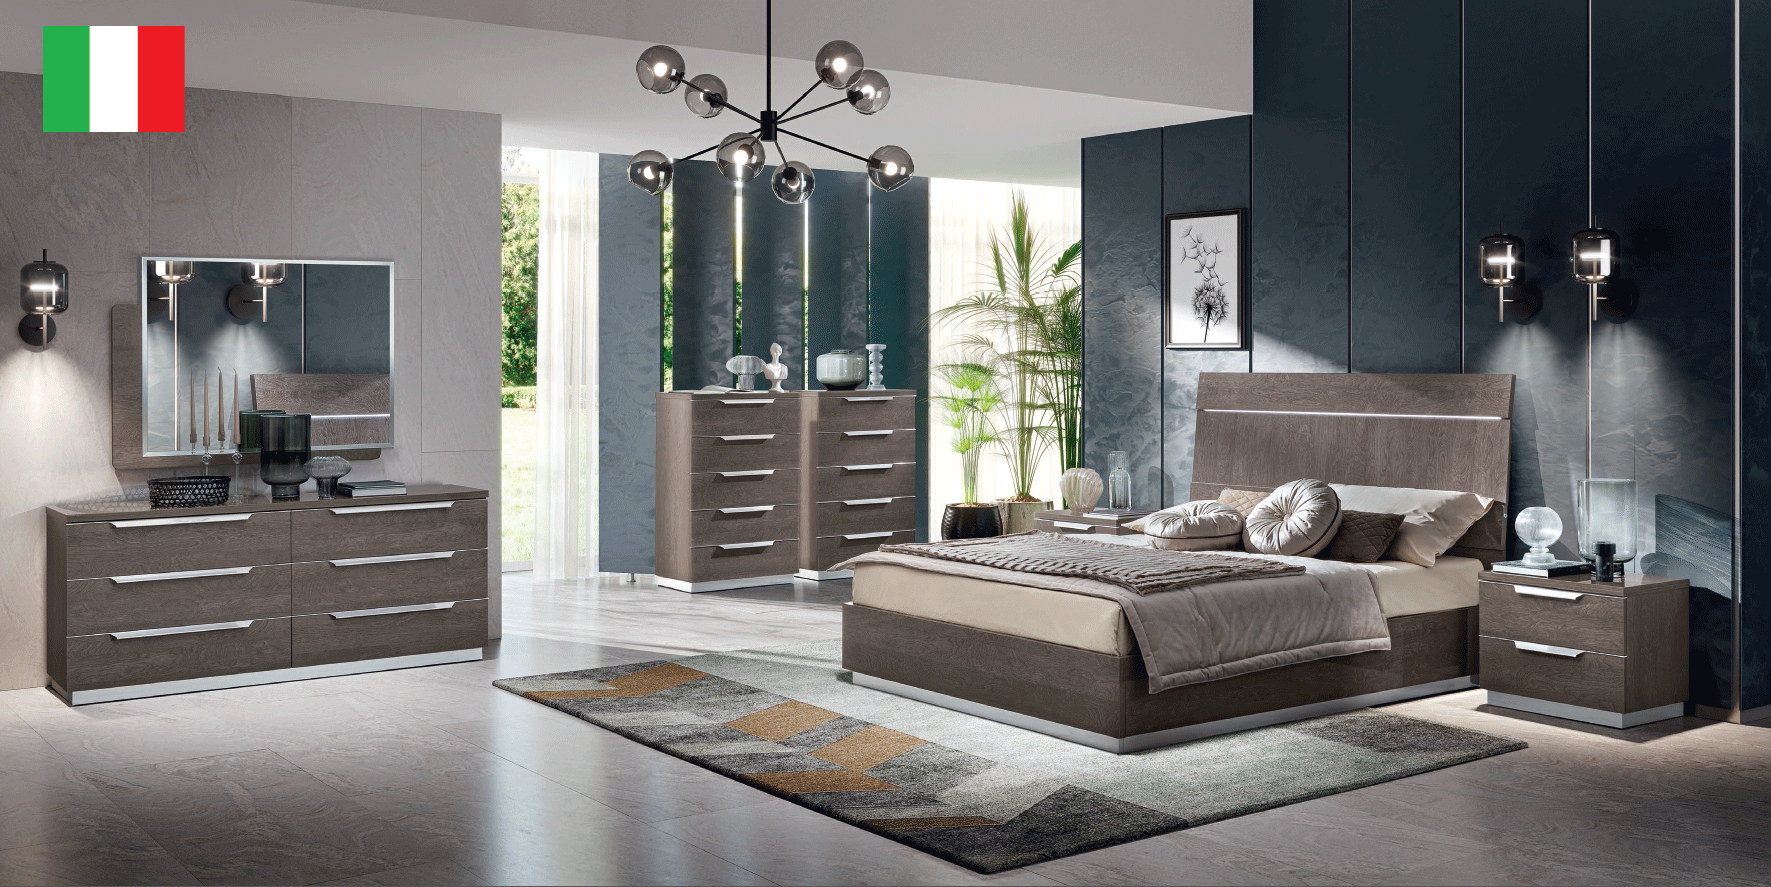 Brands Camel Classic Collection, Italy Kroma SILVER Bedroom by Camelgroup – Italy